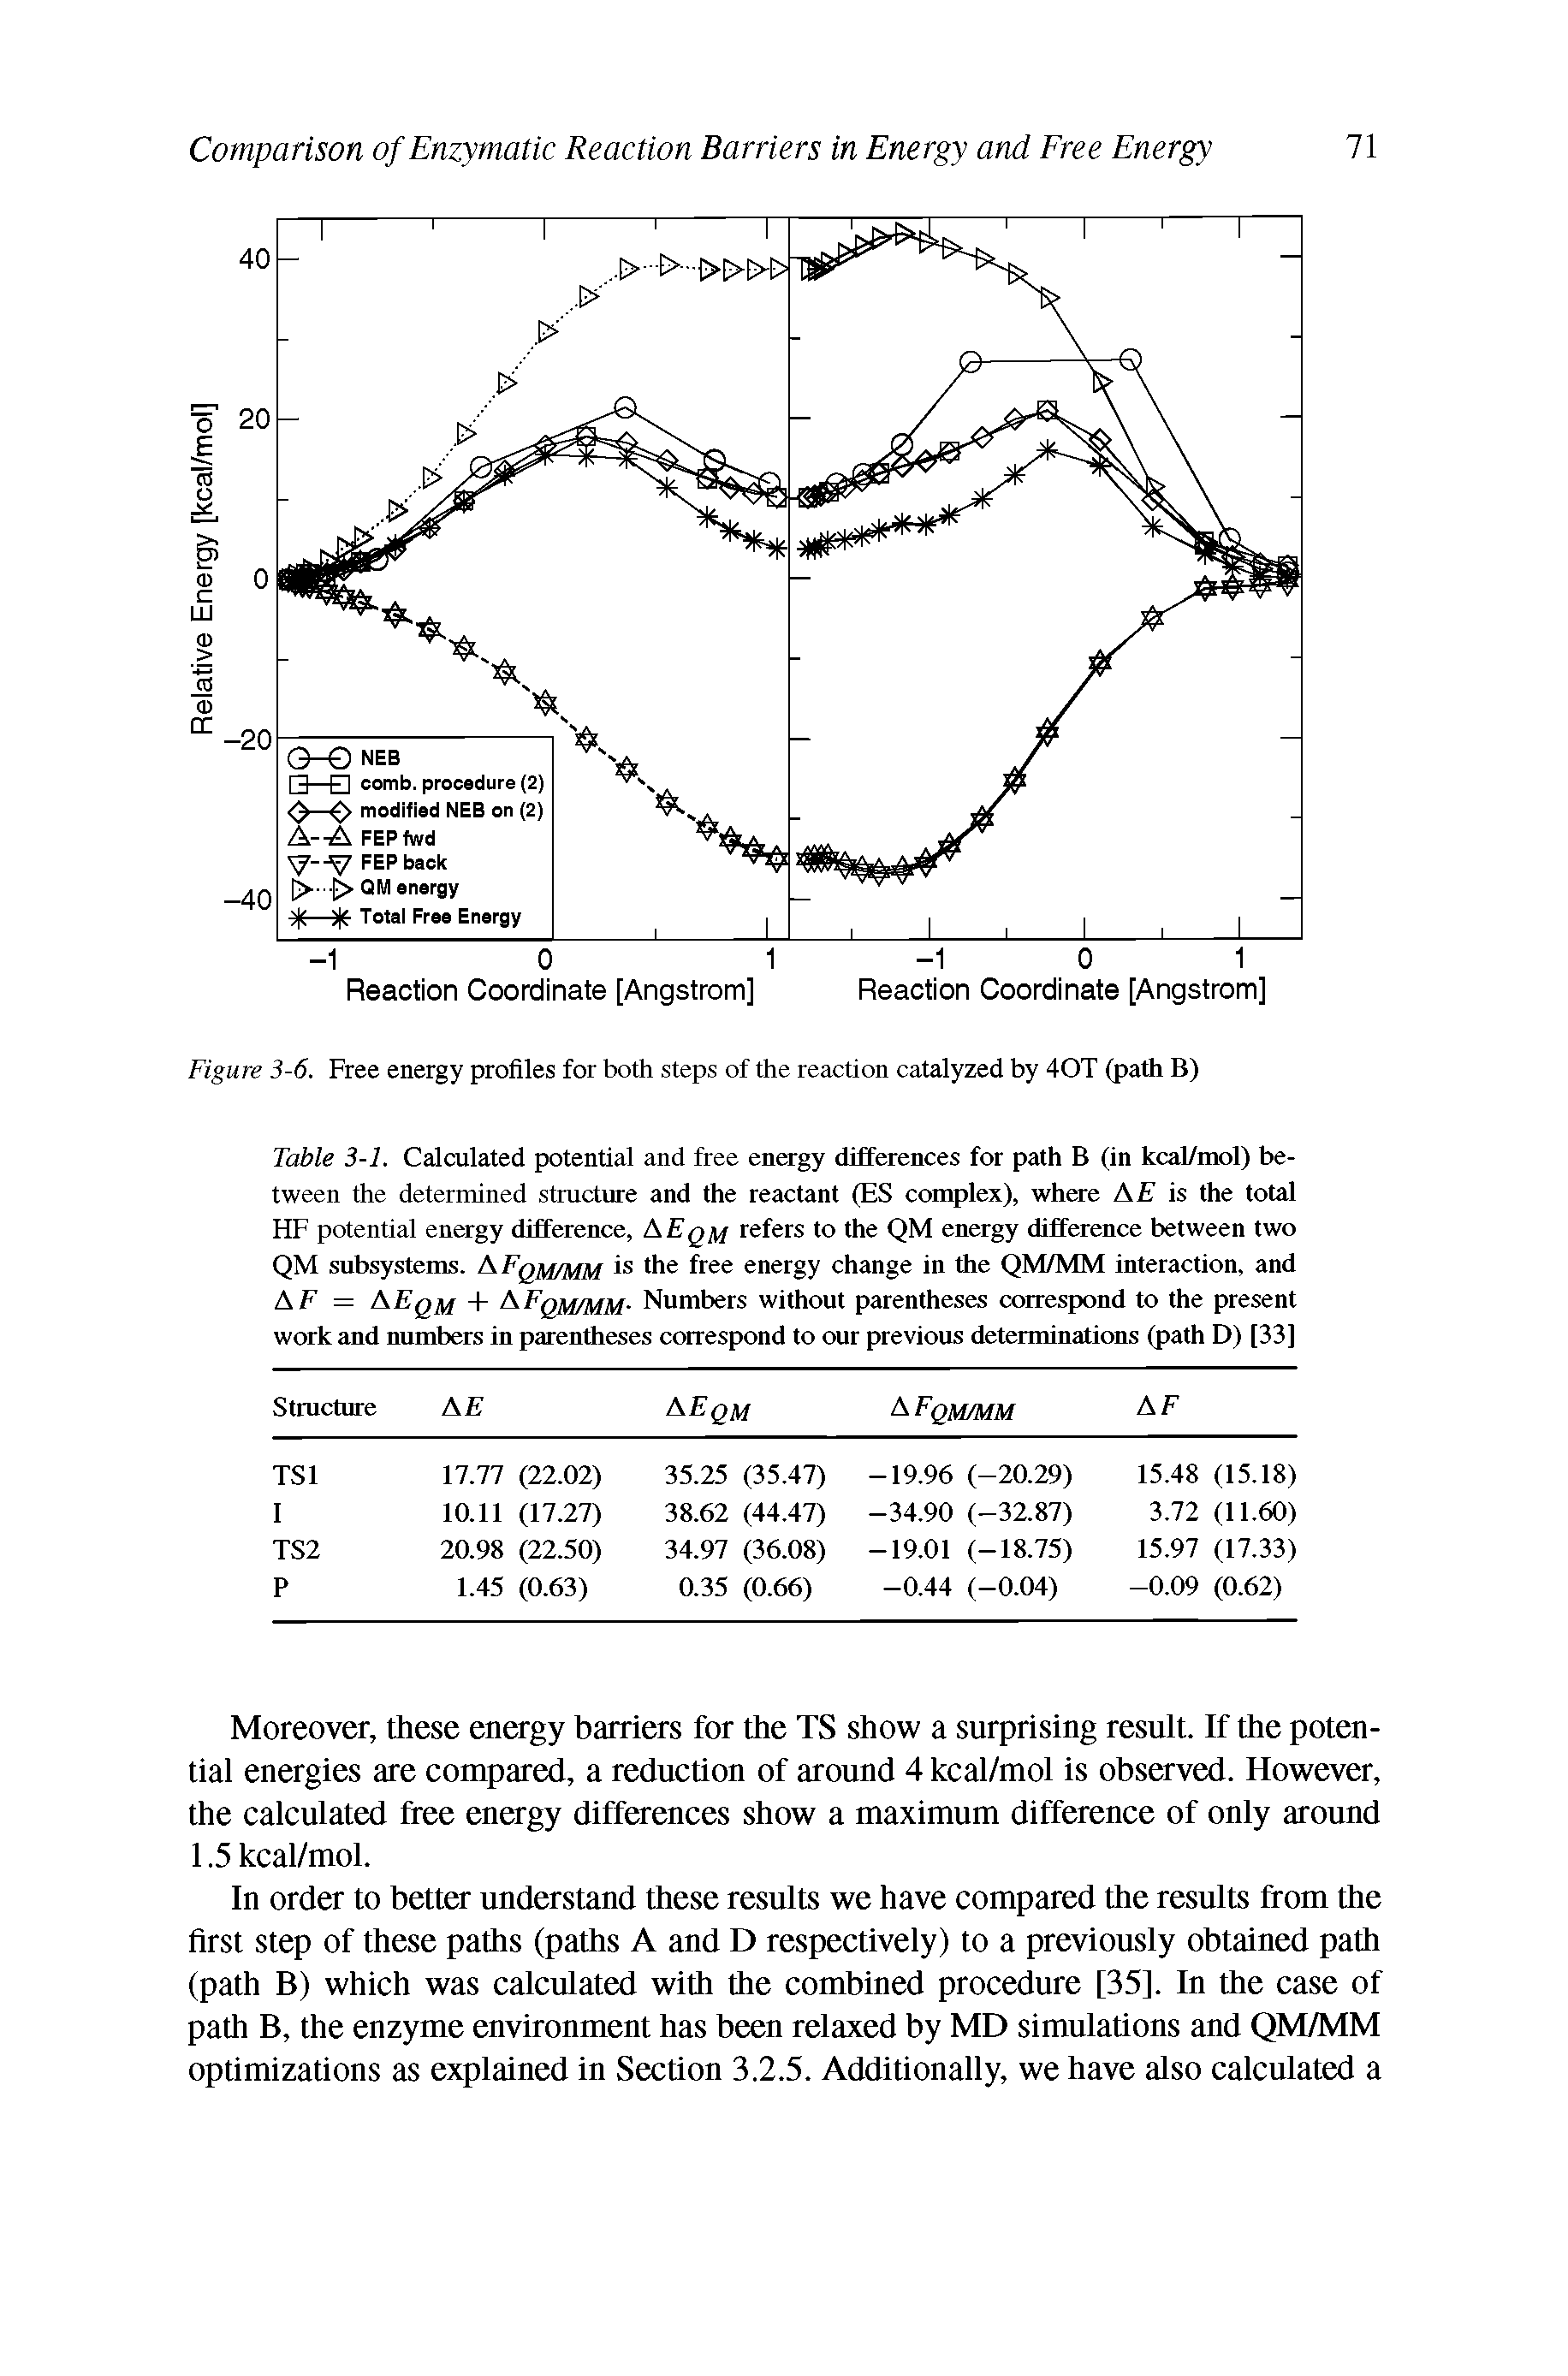 Table 3-1. Calculated potential and free energy differences for path B (in kcal/mol) between the determined structure and the reactant (ES complex), where Ait is the total HF potential energy difference, A Eqm refers to the QM energy difference between two QM subsystems. A 1 qm/MM is the free energy change in the QM/MM interaction, and A F = AEqm + A I qm/MM- Numbers without parentheses correspond to the present work and numbers in parentheses correspond to our previous determinations (path D) [33]...